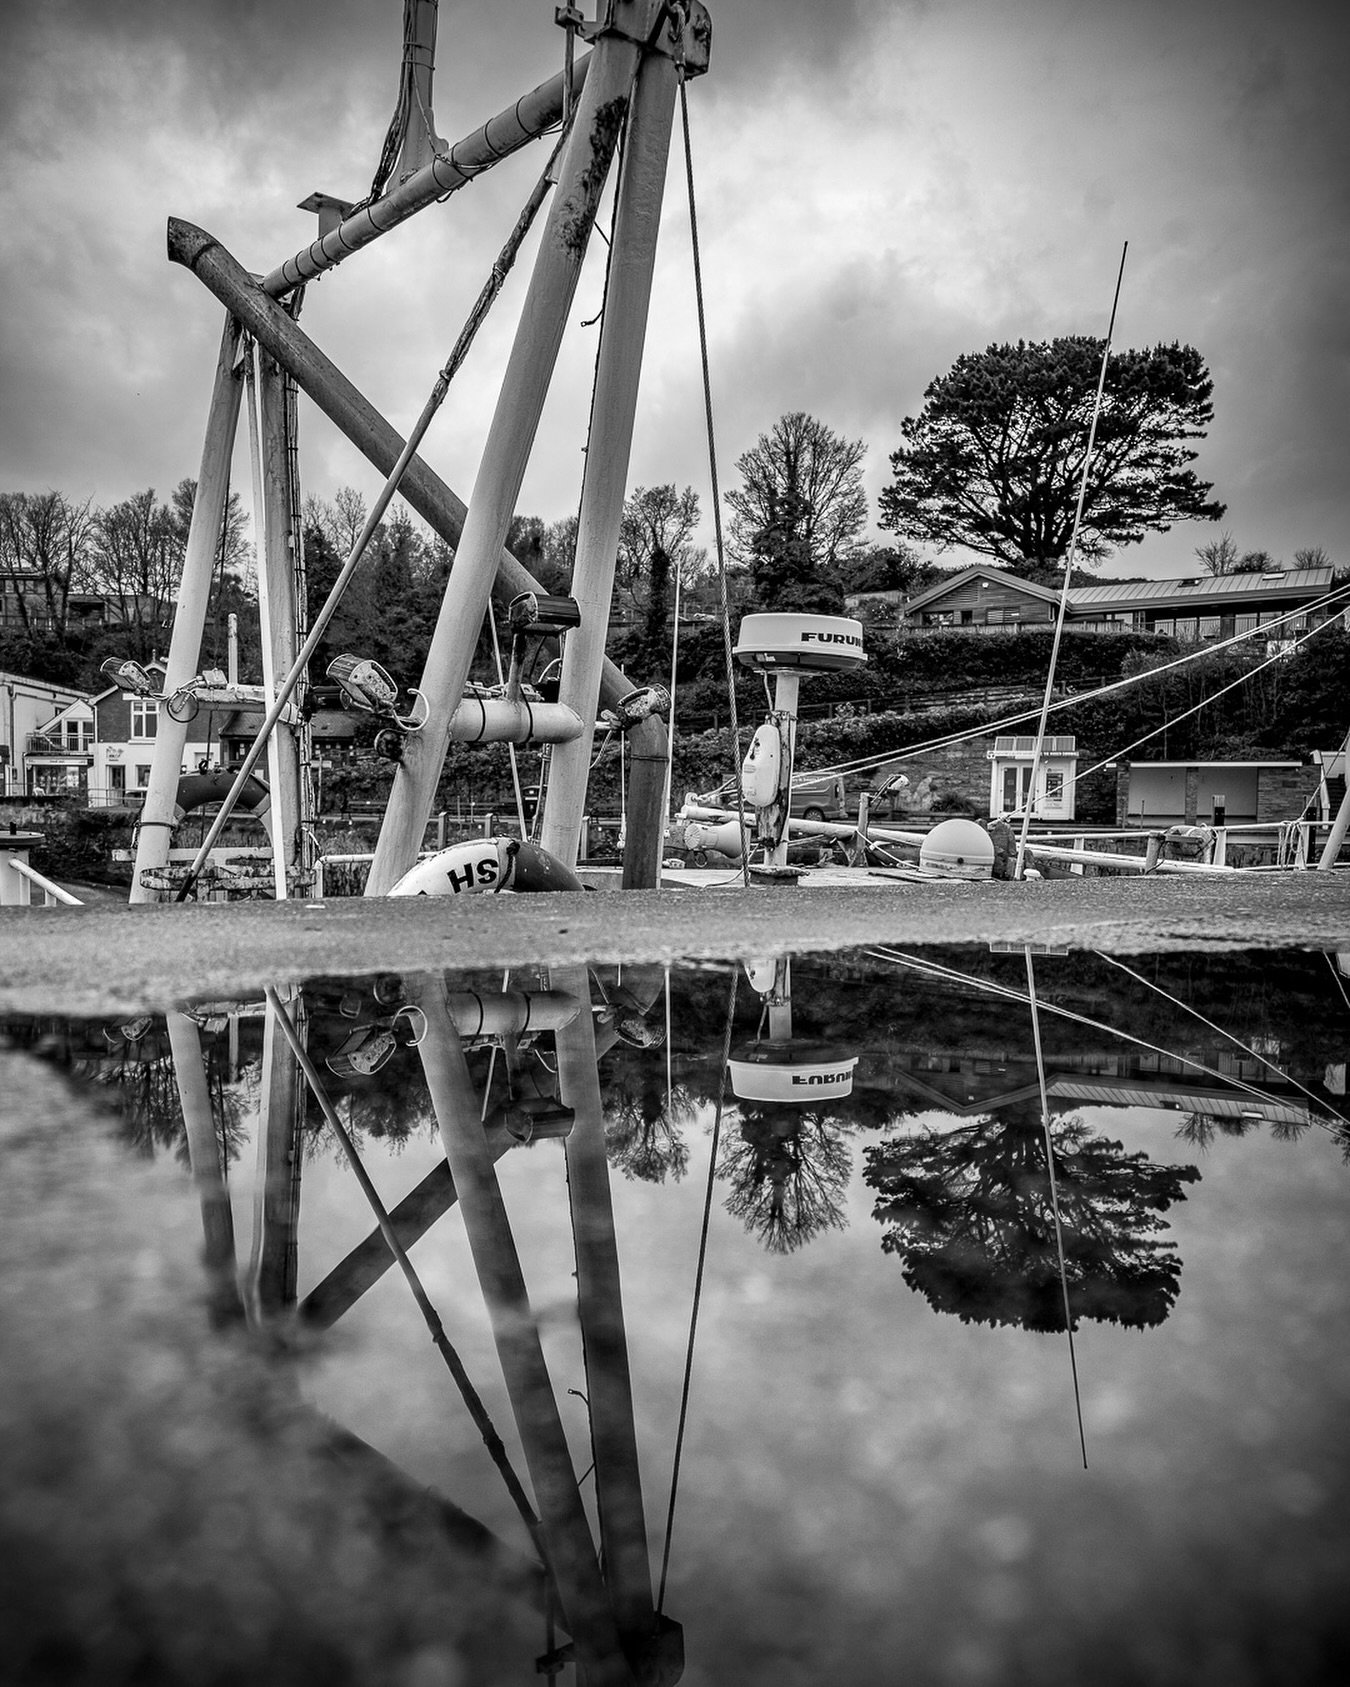 Reflecting on the Quay ...

Mar 2024 | Padstow, England
Leica M11-P |Super-Elmar-M 21 f/3.4
&copy; 2024 Simon R. Cole

#Leica #LeicaM #LeicaUK #LeicaPhotography #ShotWideOpen #BnW #BnWPhoto
#BnWPhotography #Harbour #Masters_in_BnW #Incredible_BnW #Bn